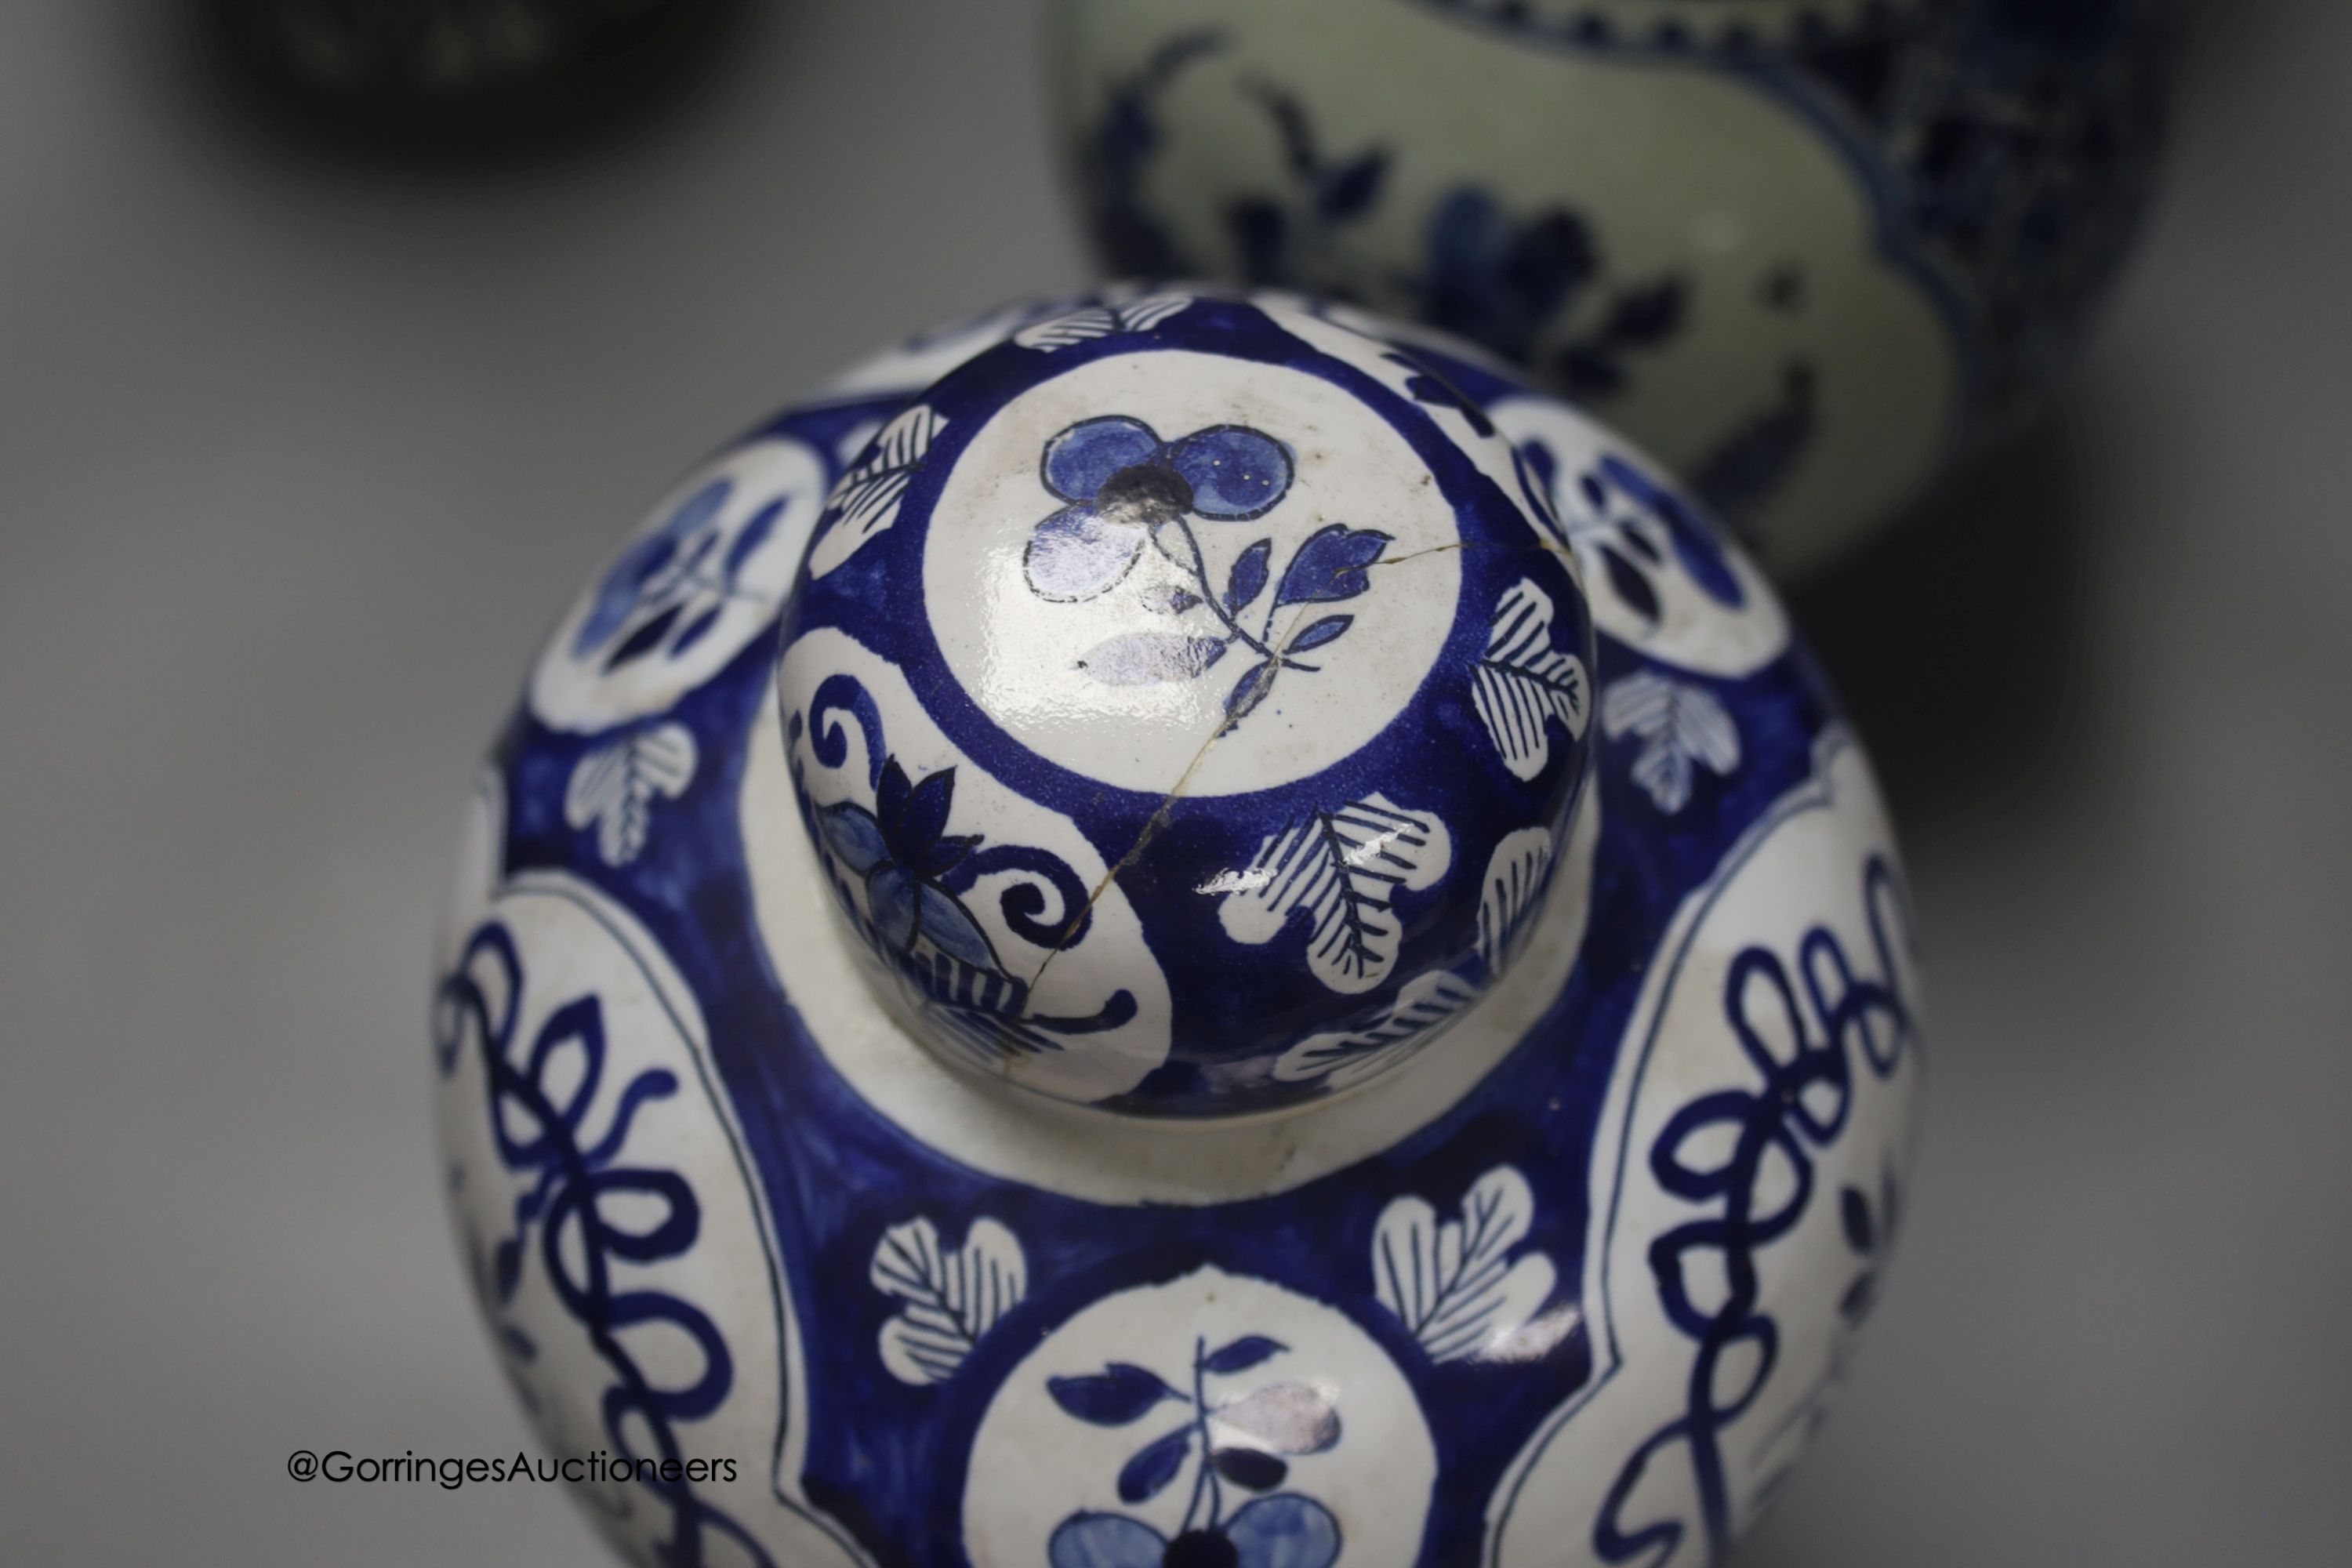 A pair of Dutch Delft blue and white vases, 29cm, a similar ovoid jar and cover and a bulbous jug